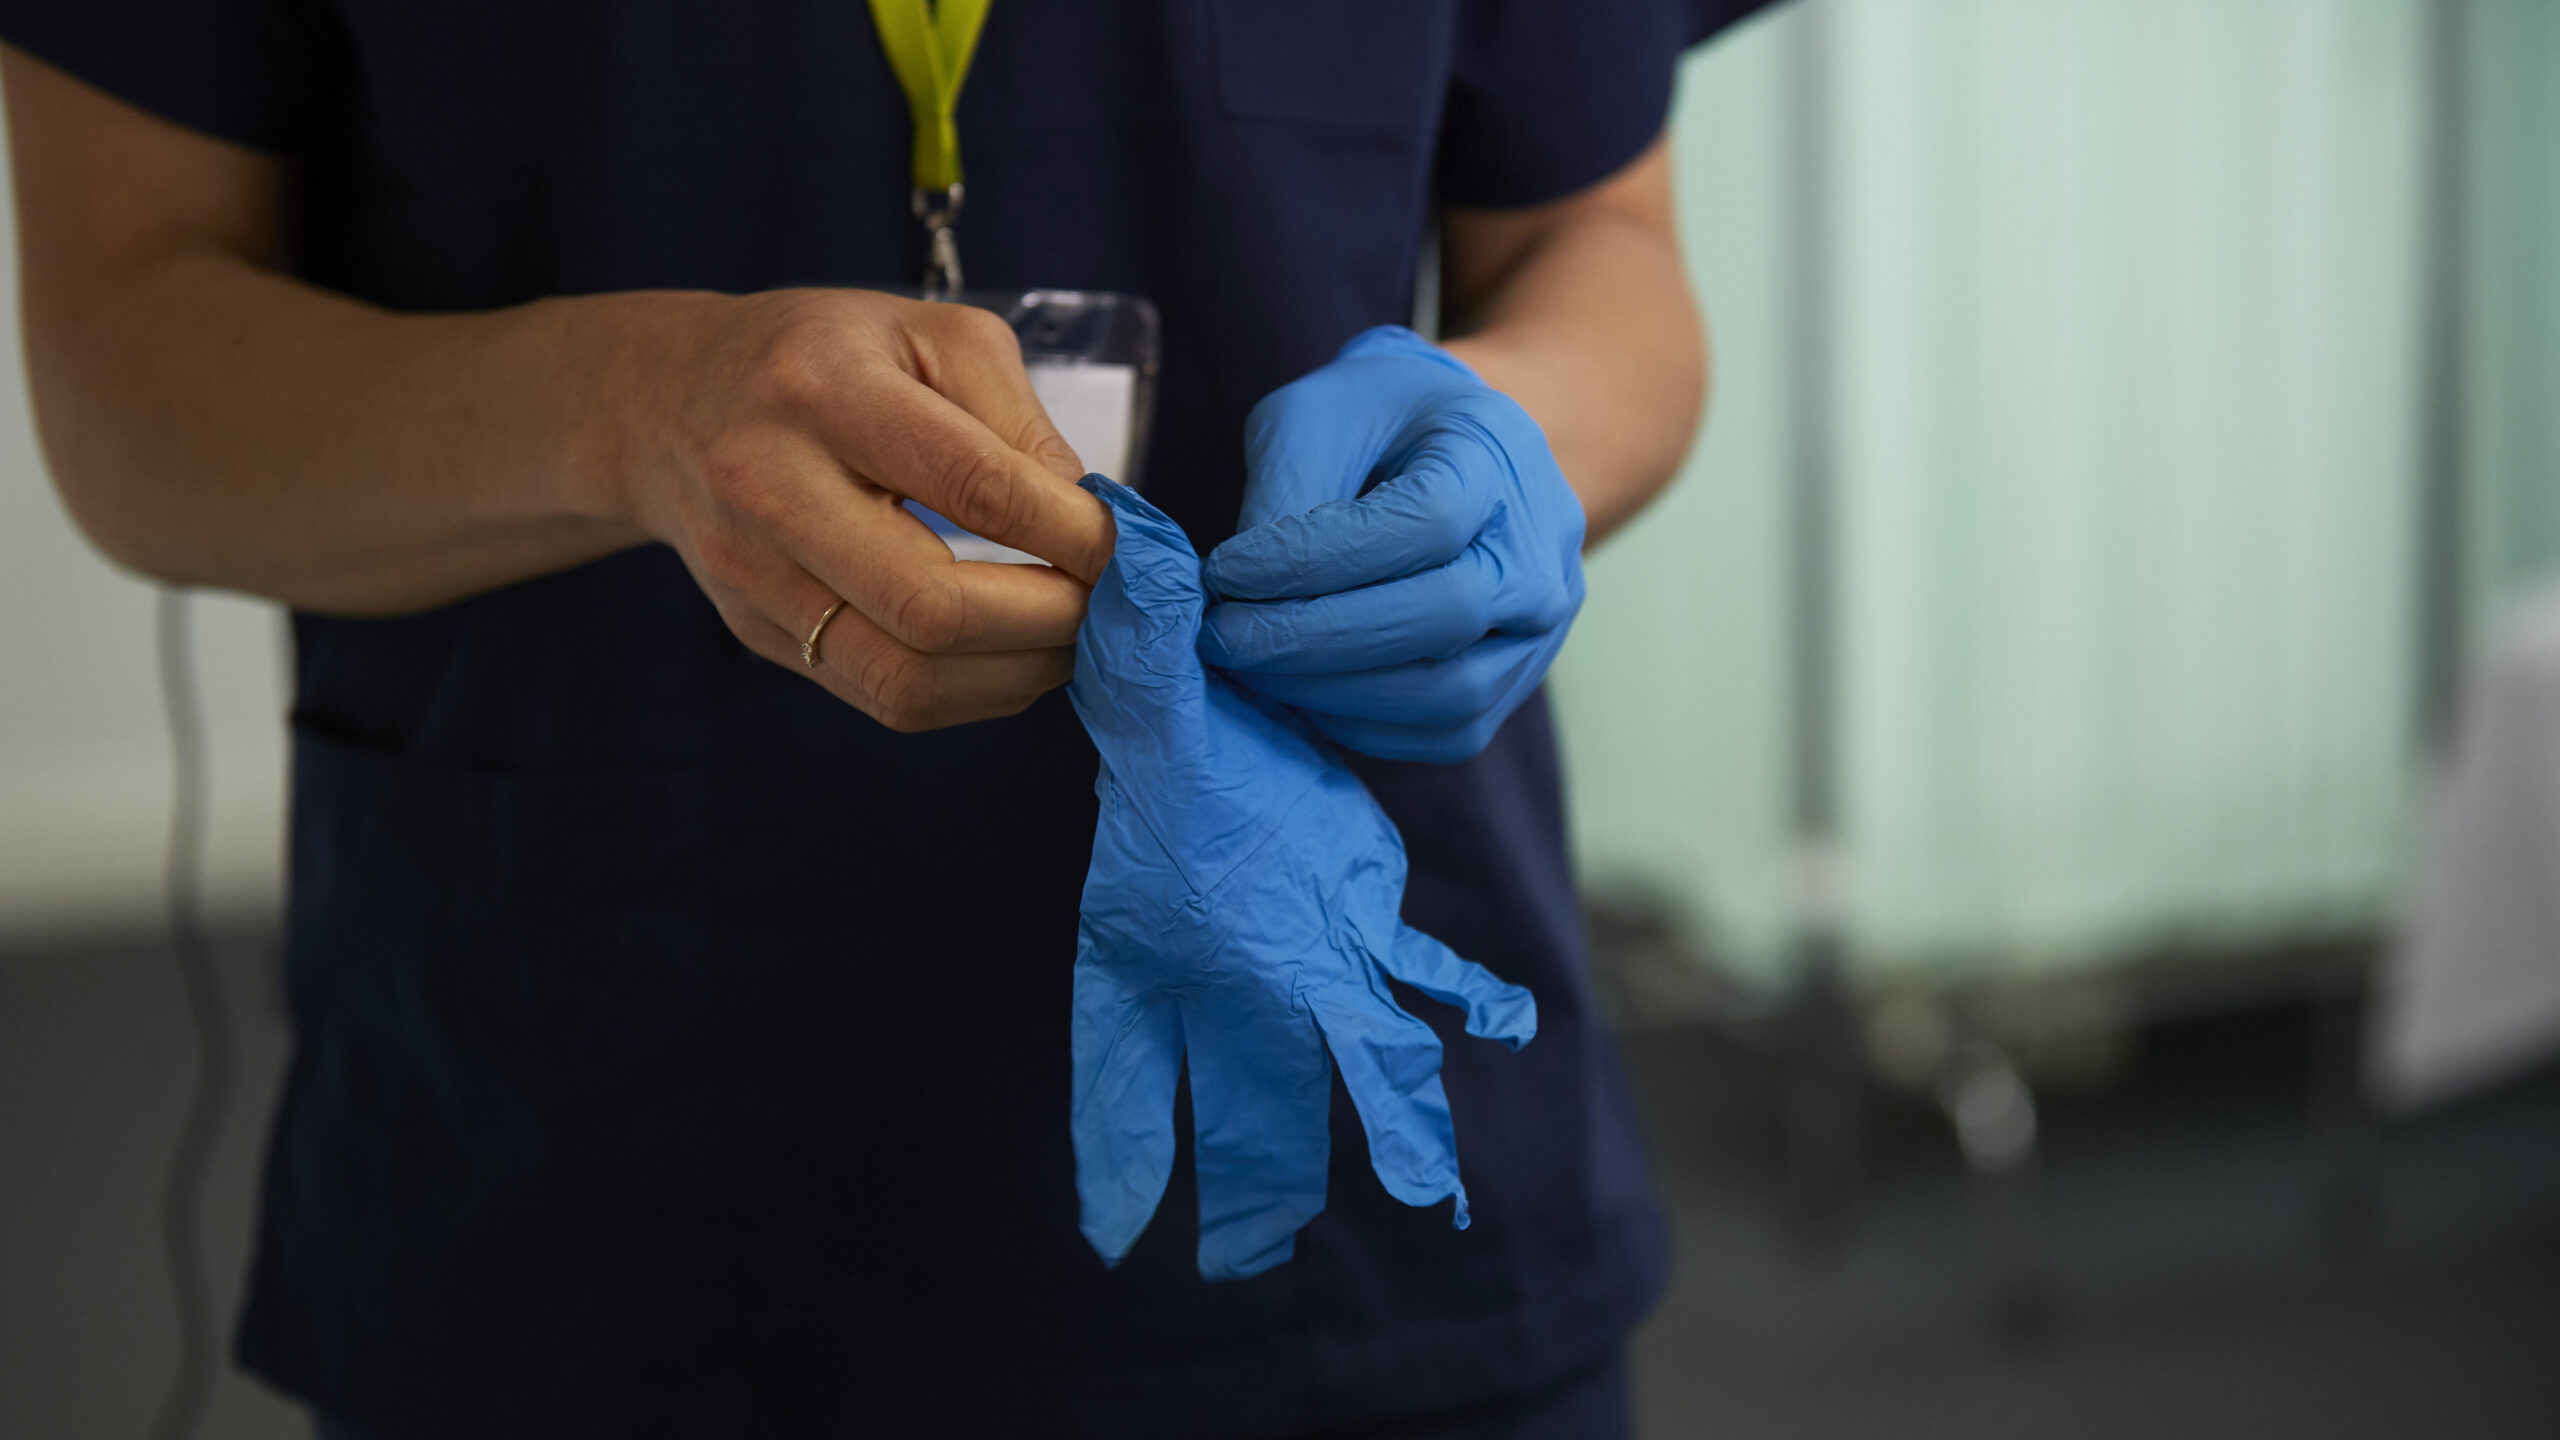 Close up of medical professional putting on medical gloves.